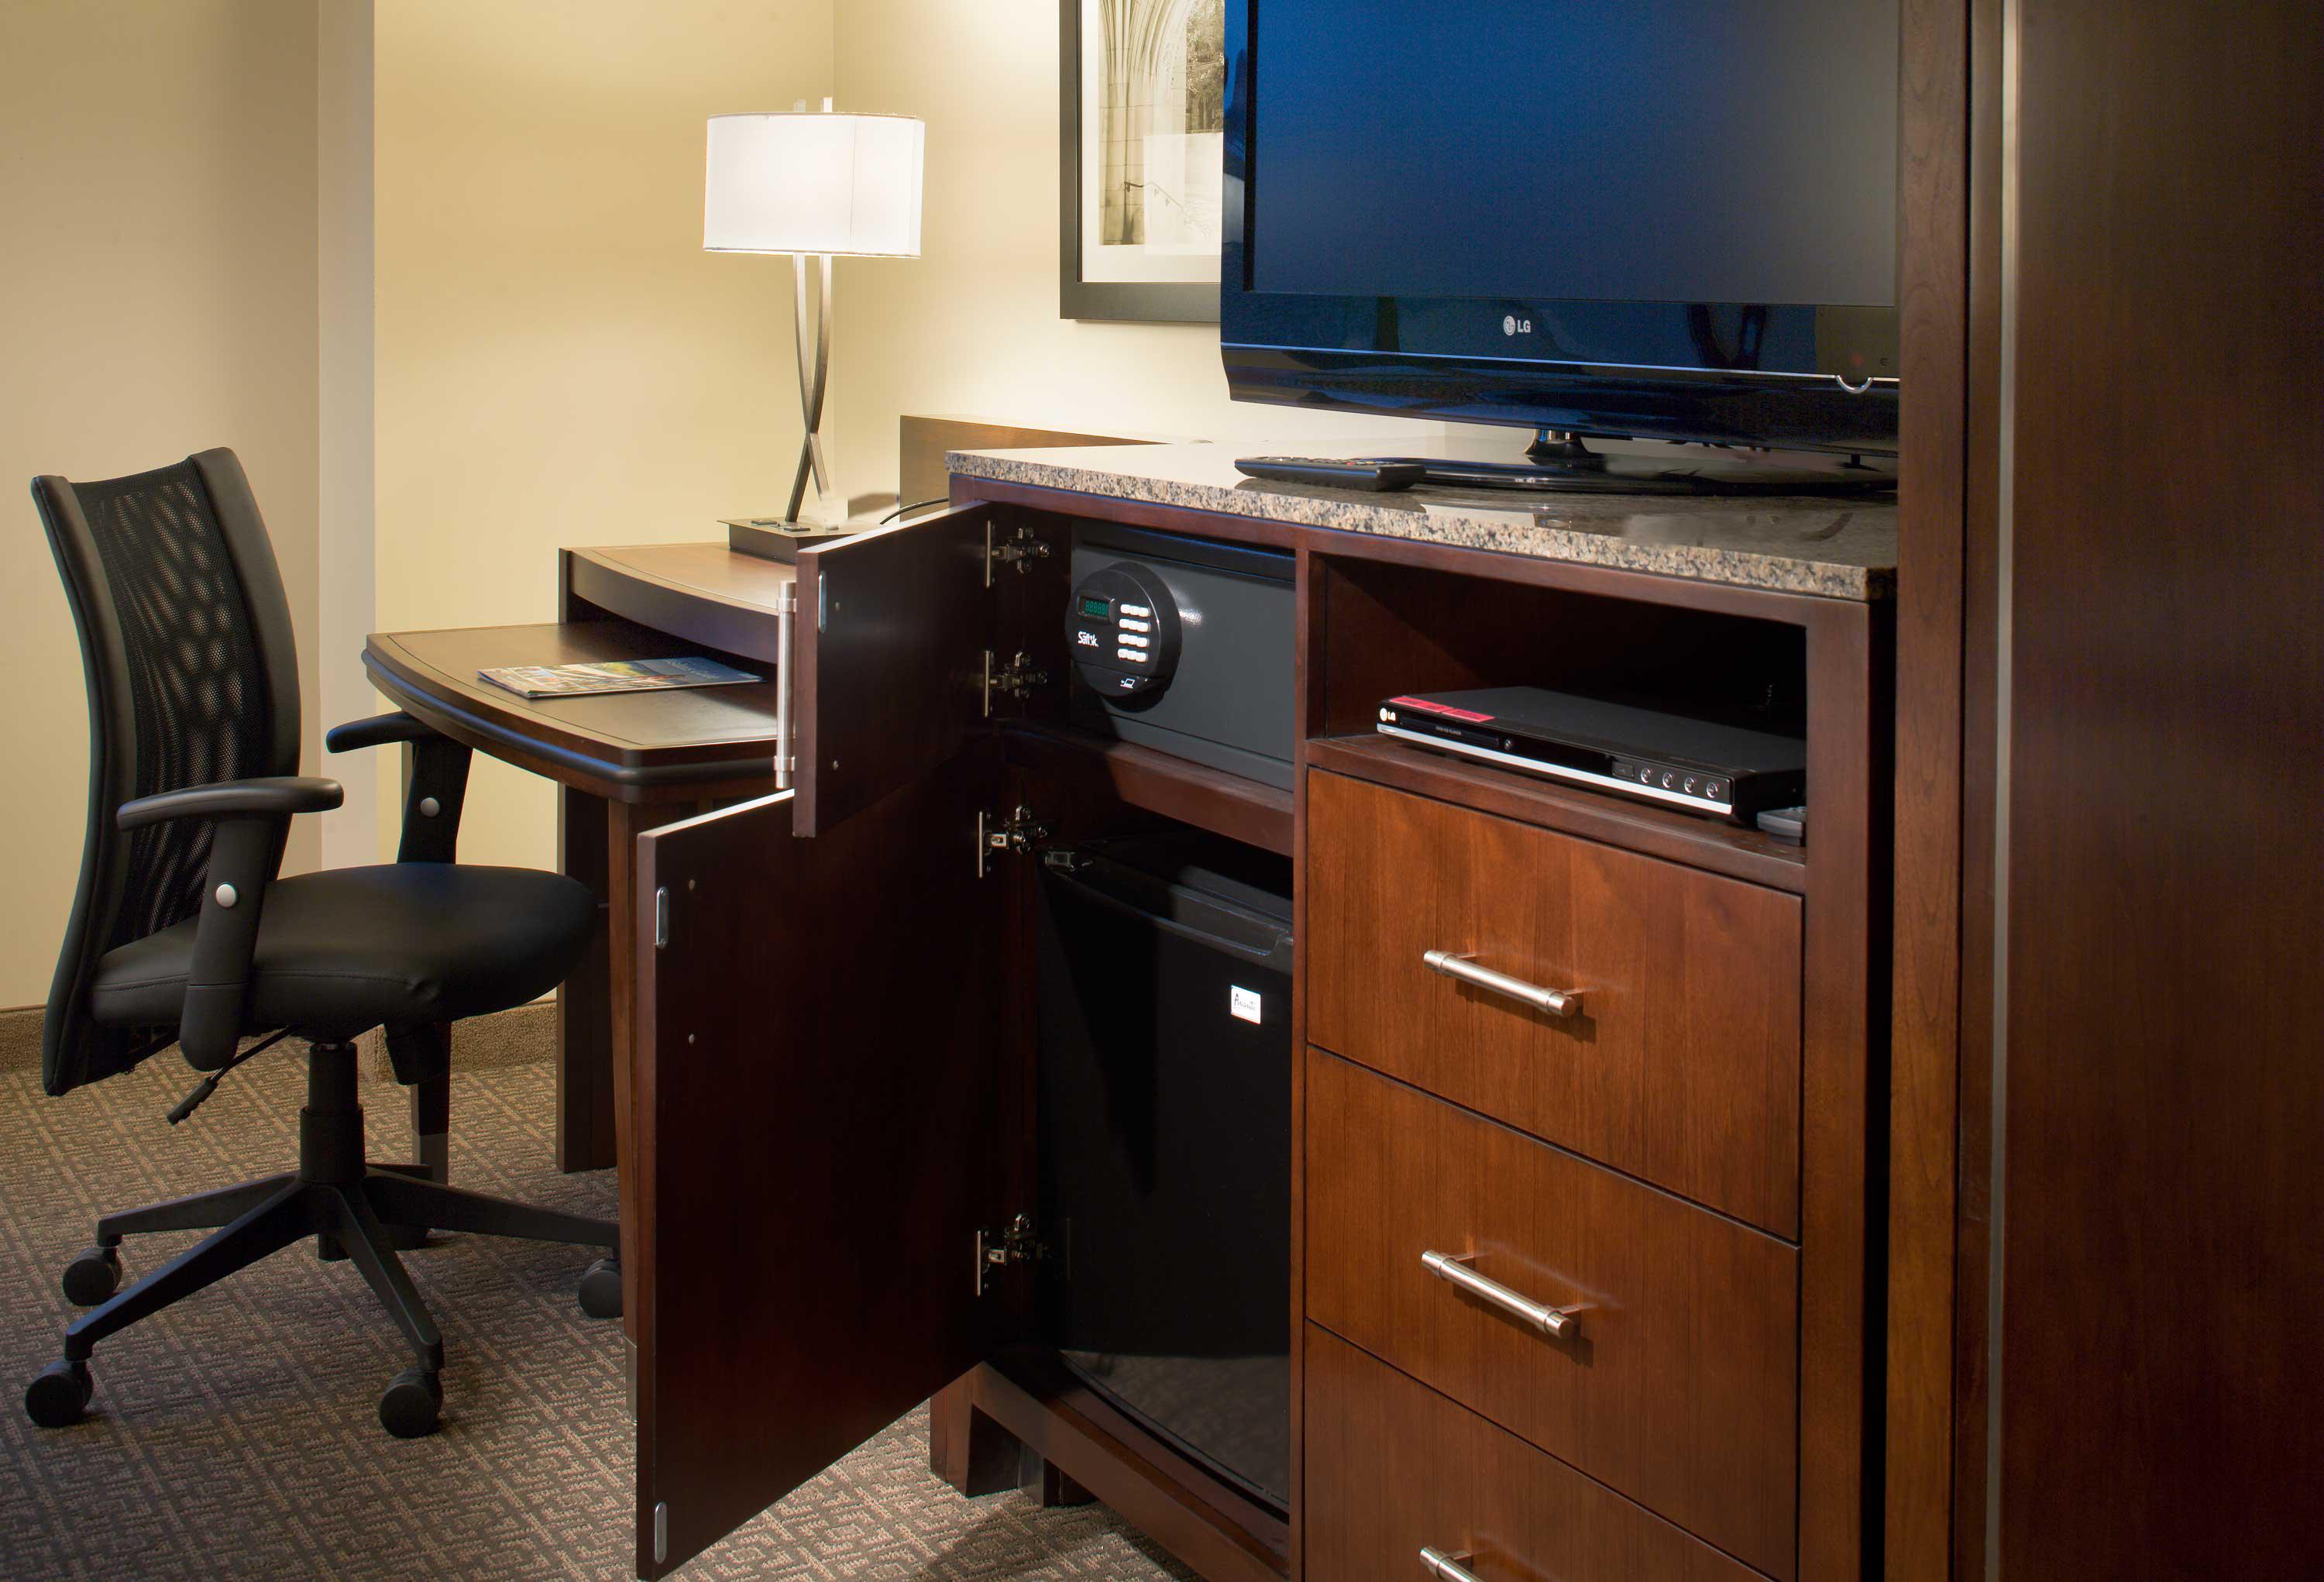 Laptop-sized safes and mini-fridges come standard at The New Haven Hotel, just one block from Yale University.